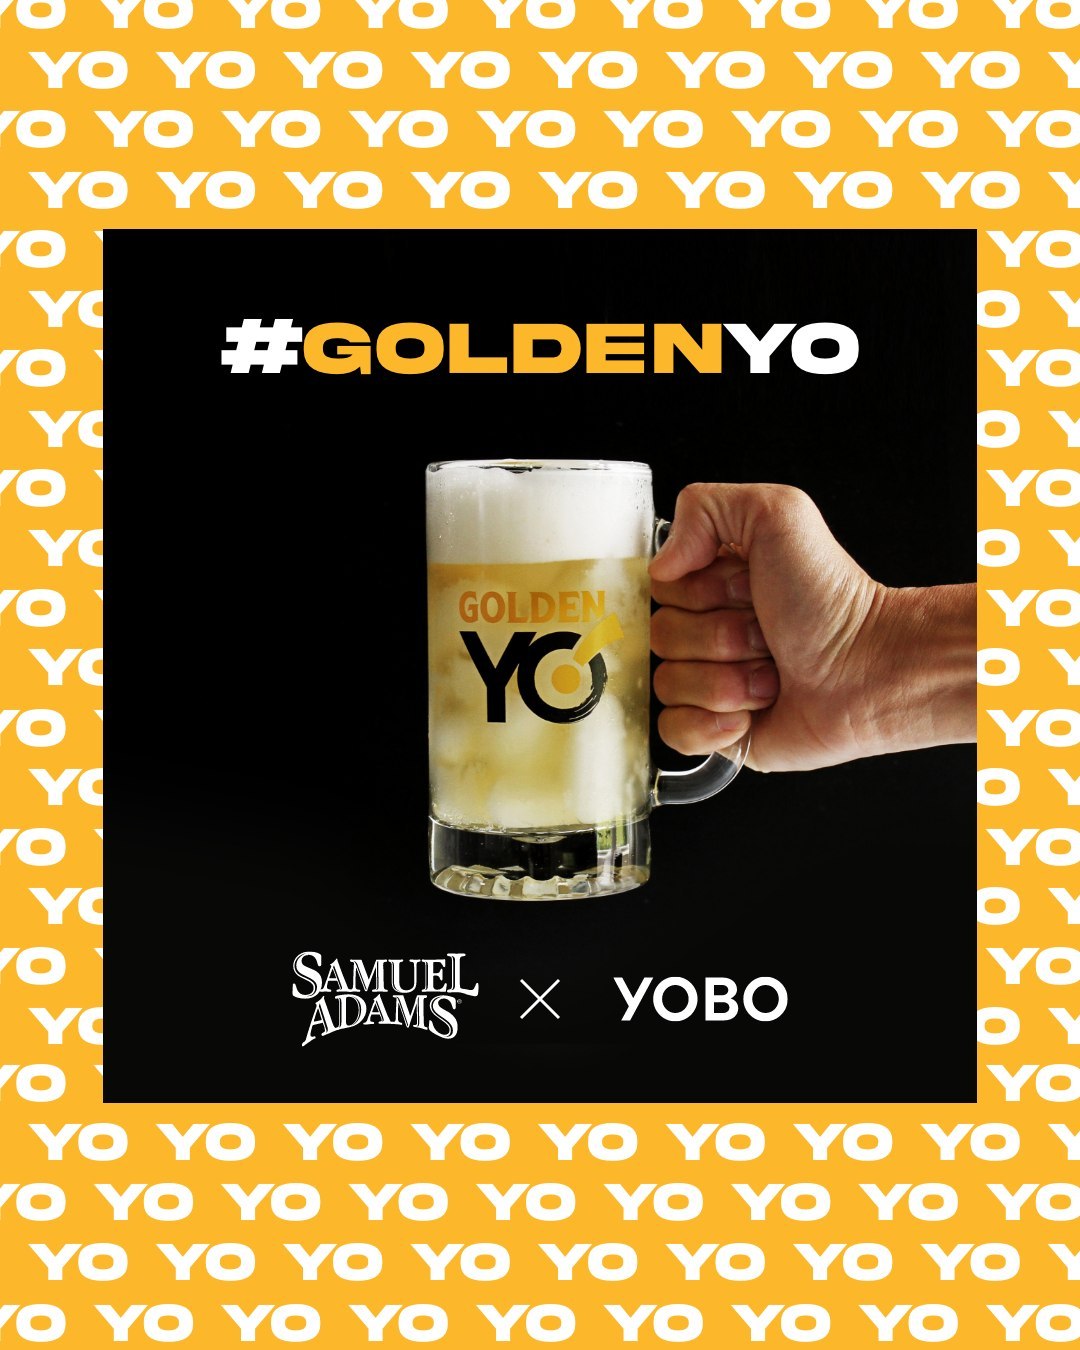 Yobo Drinks, Collaborates With Samuel Adams To Launch Golden Yo!